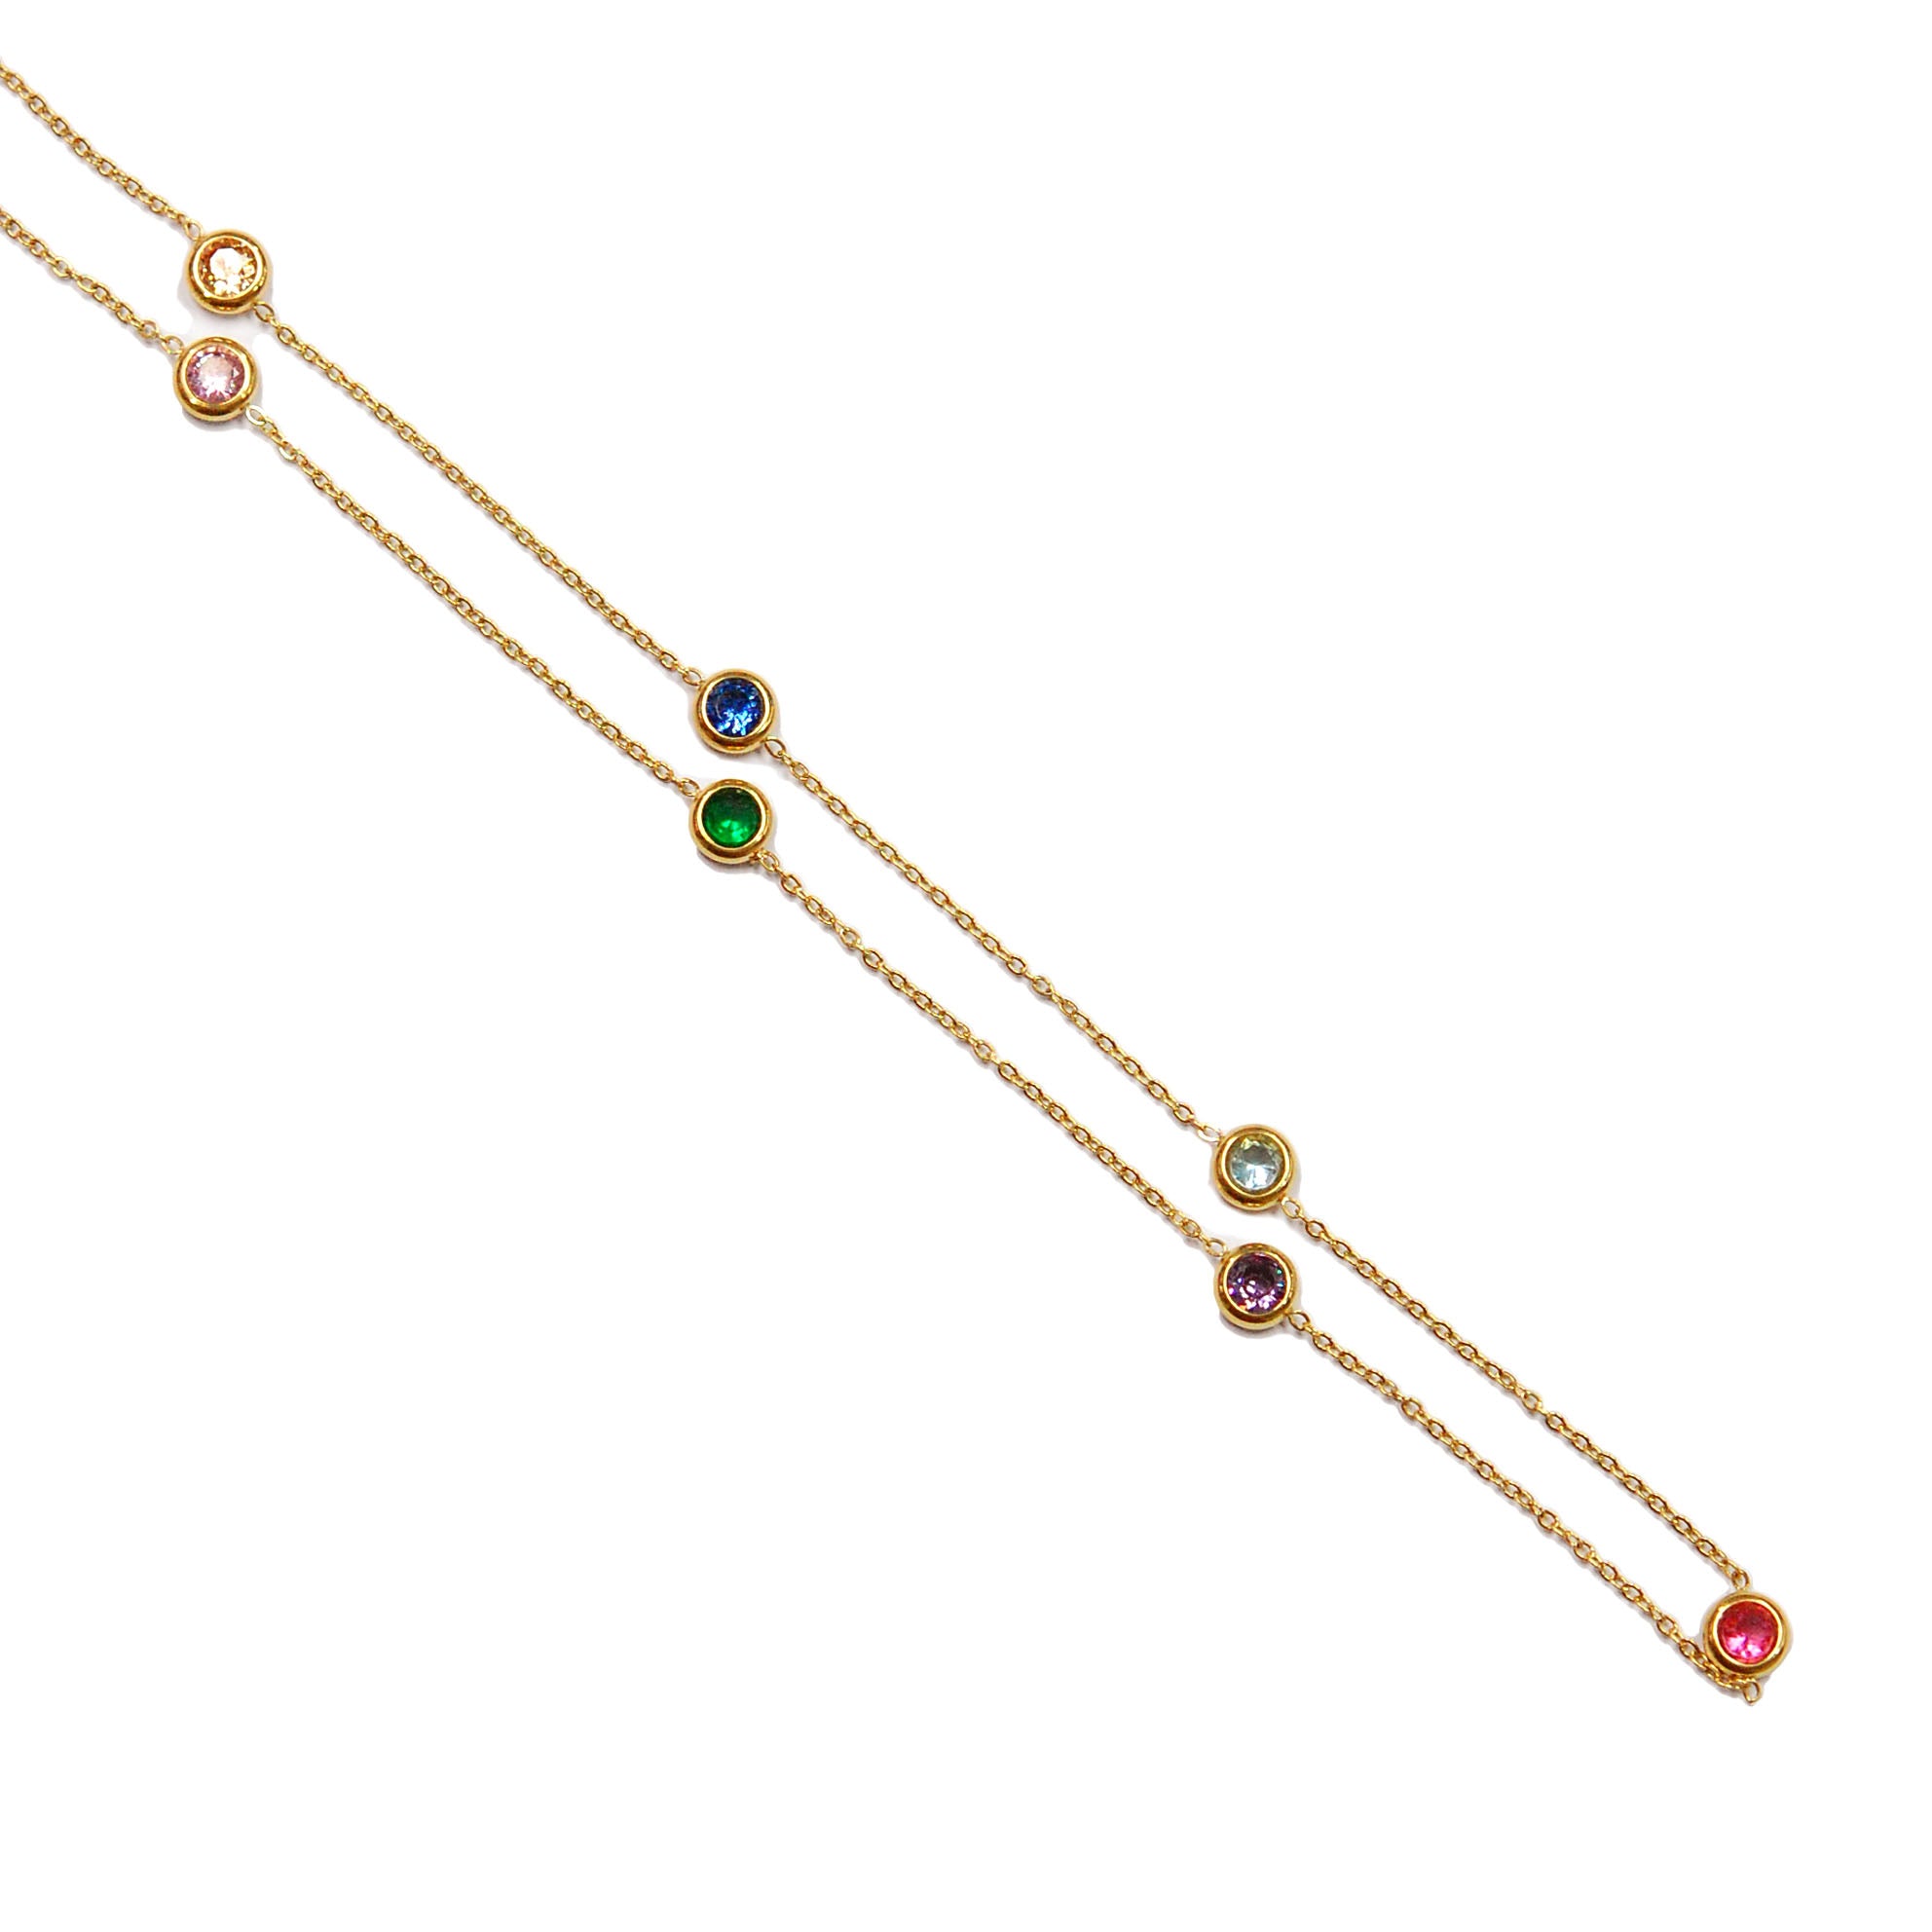 ESN 8043: All IPG Enclosed Multi-Color Cz Necklace (18"+2")